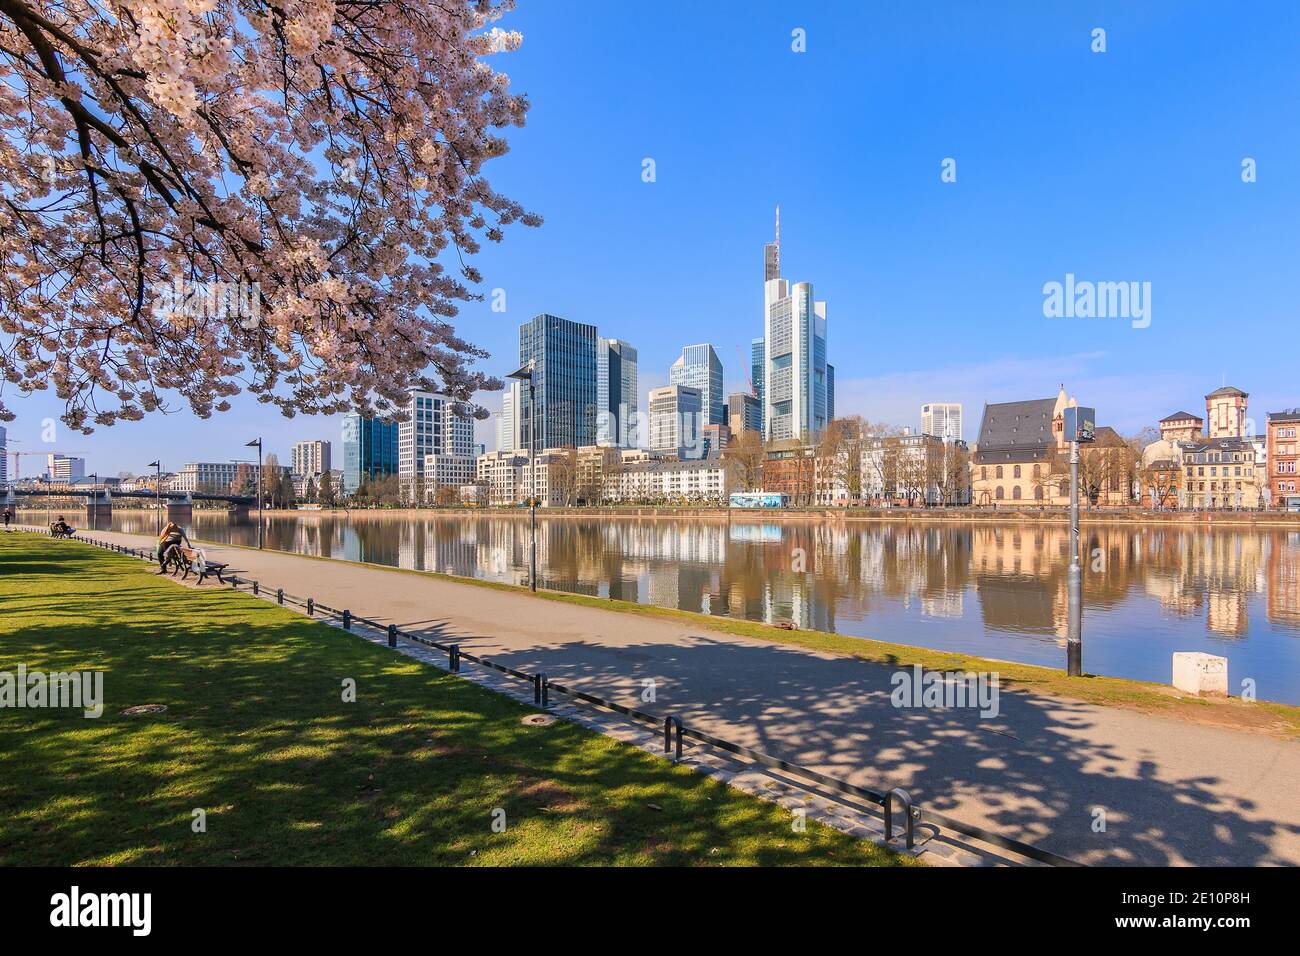 Park on the banks of the Main in Frankfurt. Trees with blossoms in spring. High-rise buildings in the city center of the financial district. Houses by Stock Photo